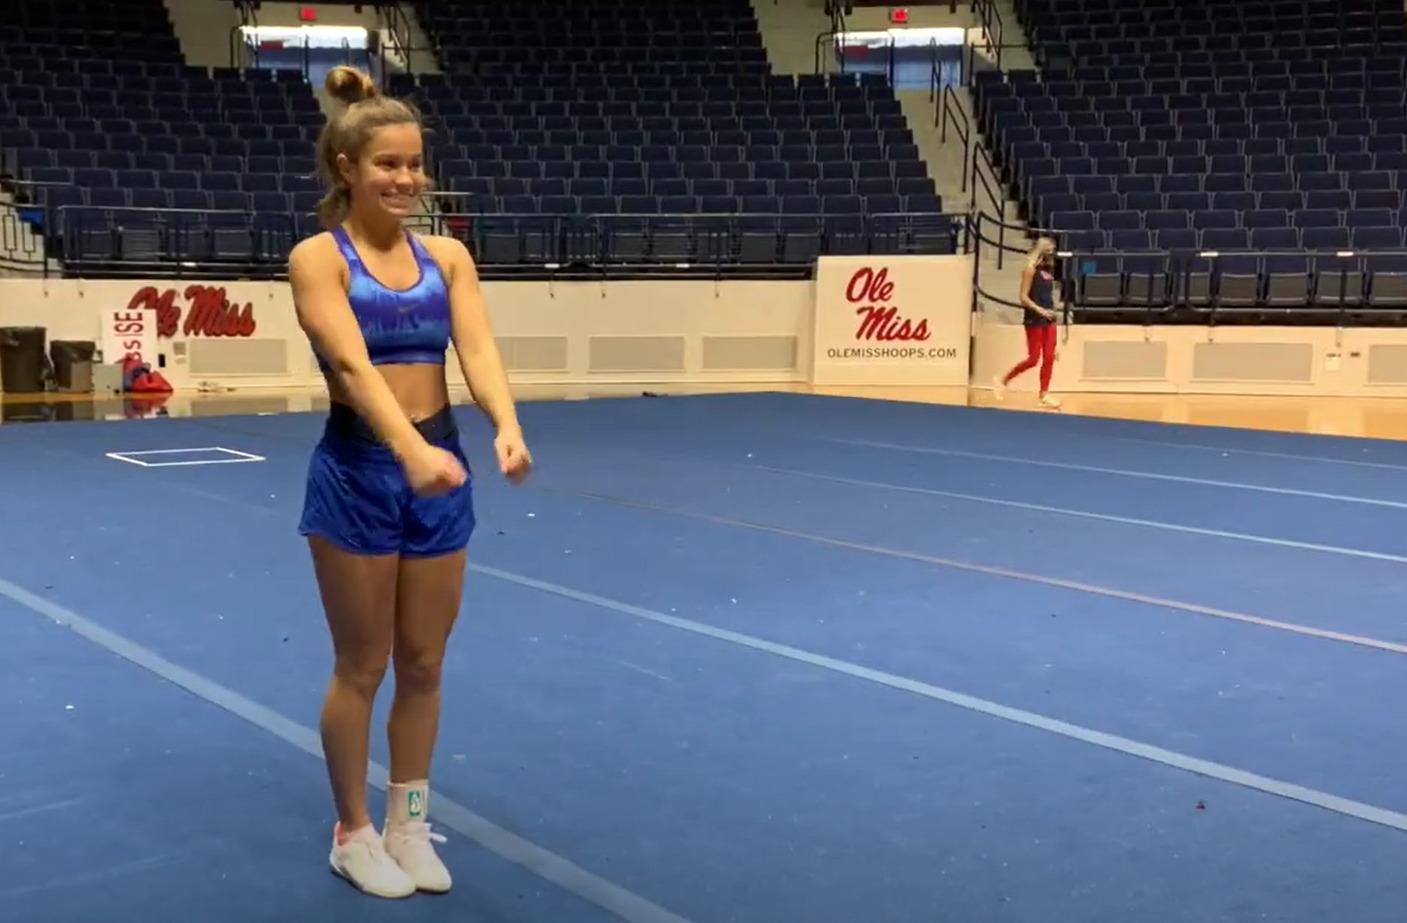 VIDEO: A Day in the Life of a UM Cheerleader 